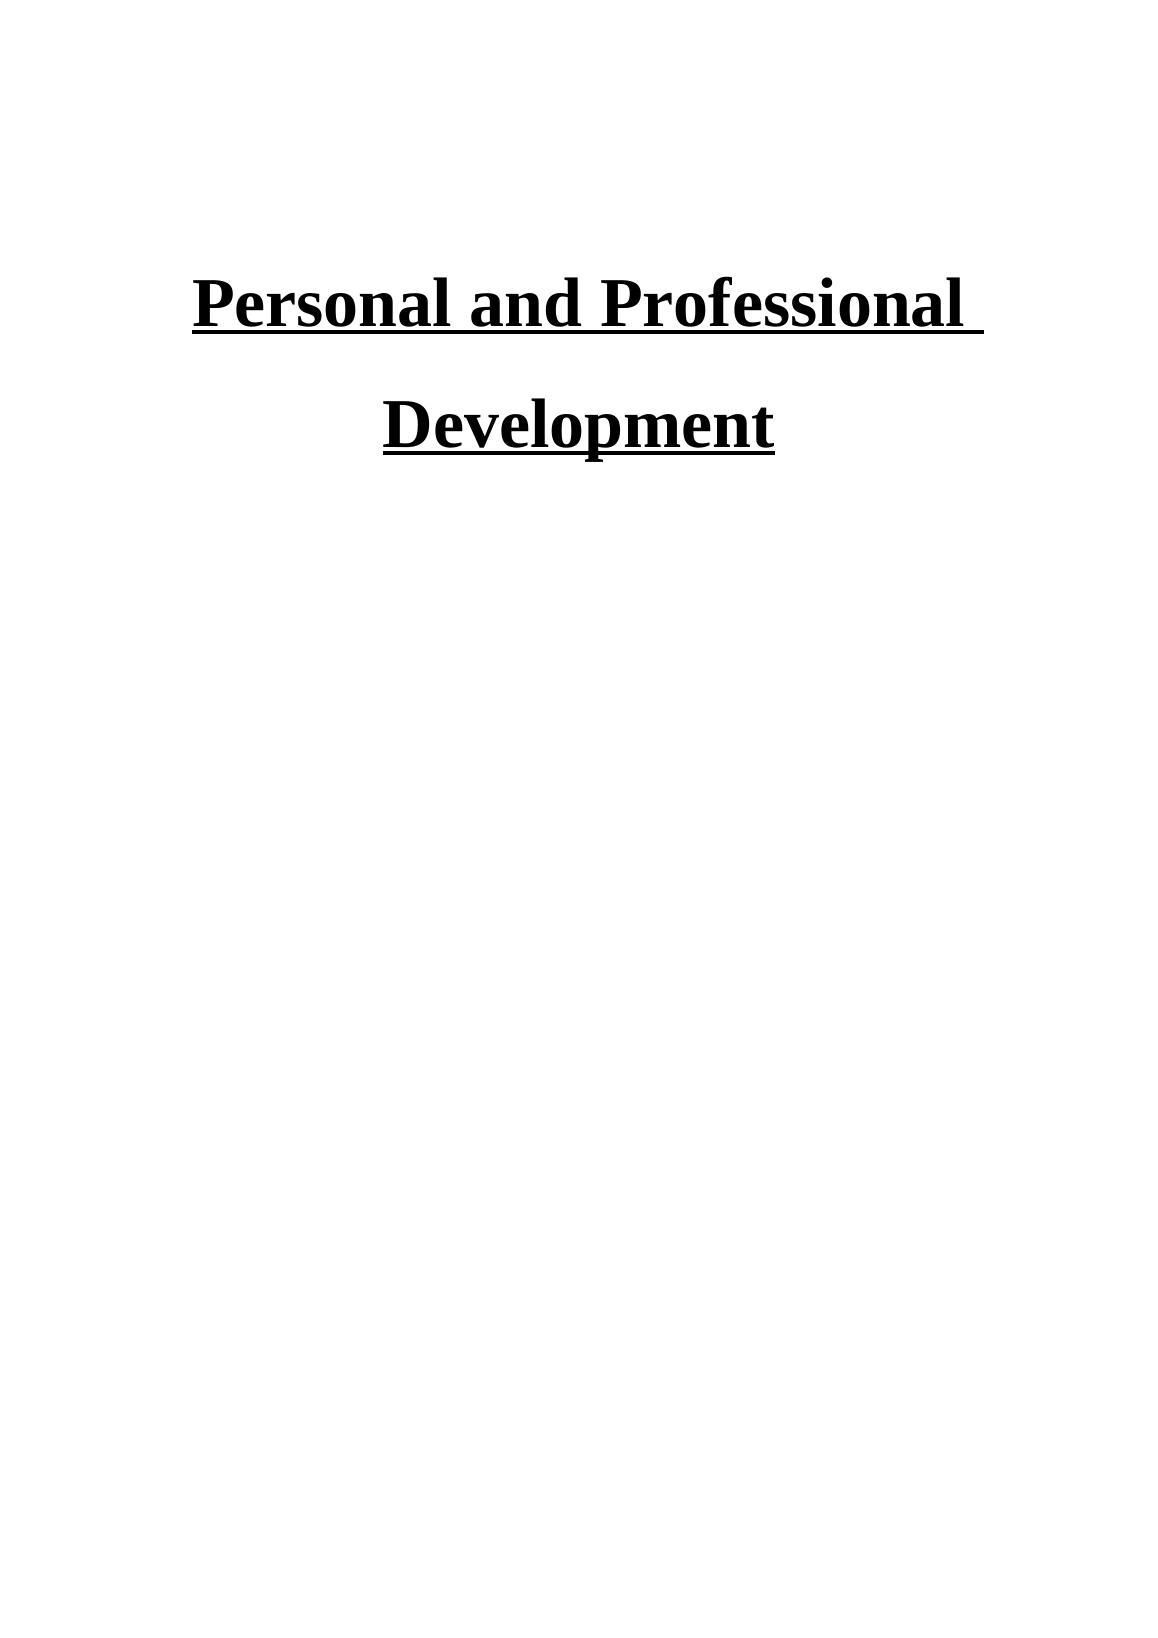 Personal and Professional Development Sample | Assignment_1